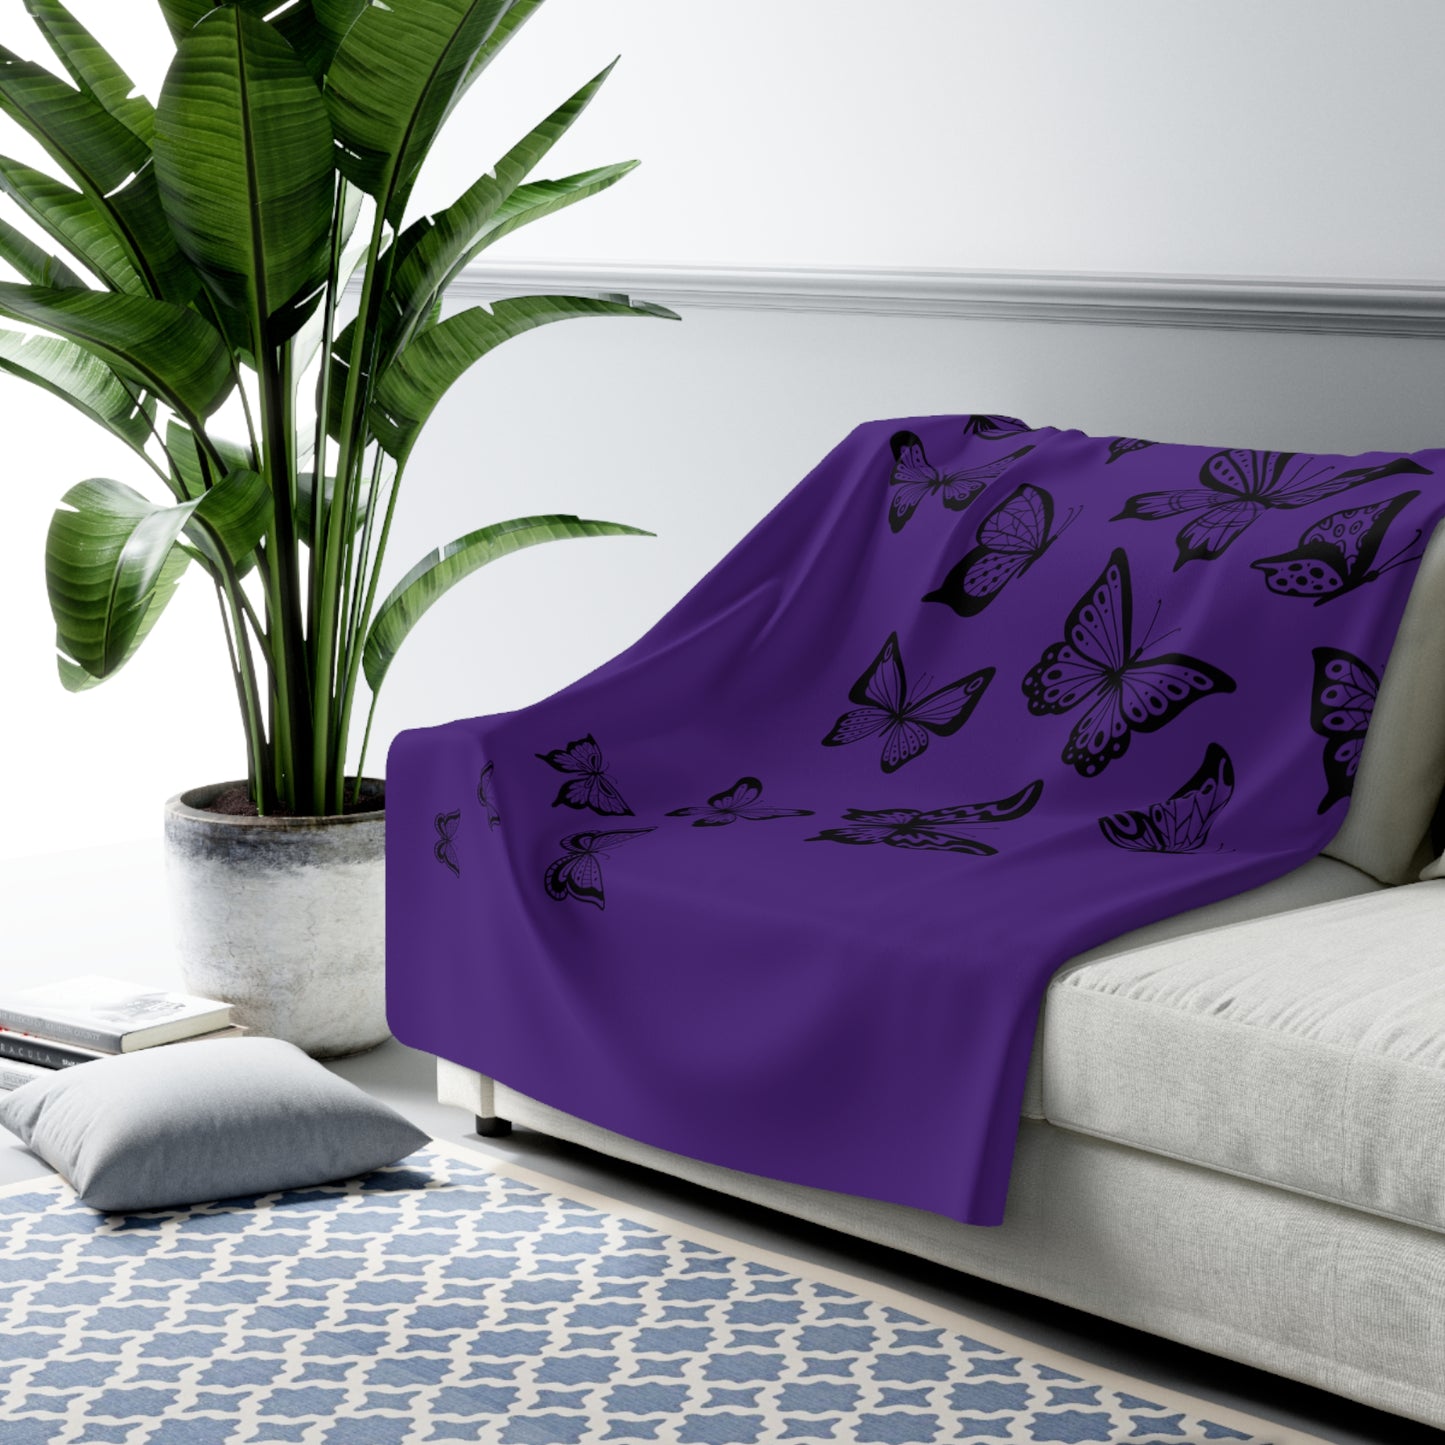 LUXURIOUS COZY BLANKET: THE EPITOME OF COMFORT AND WARMTH | Butterfly Violet 